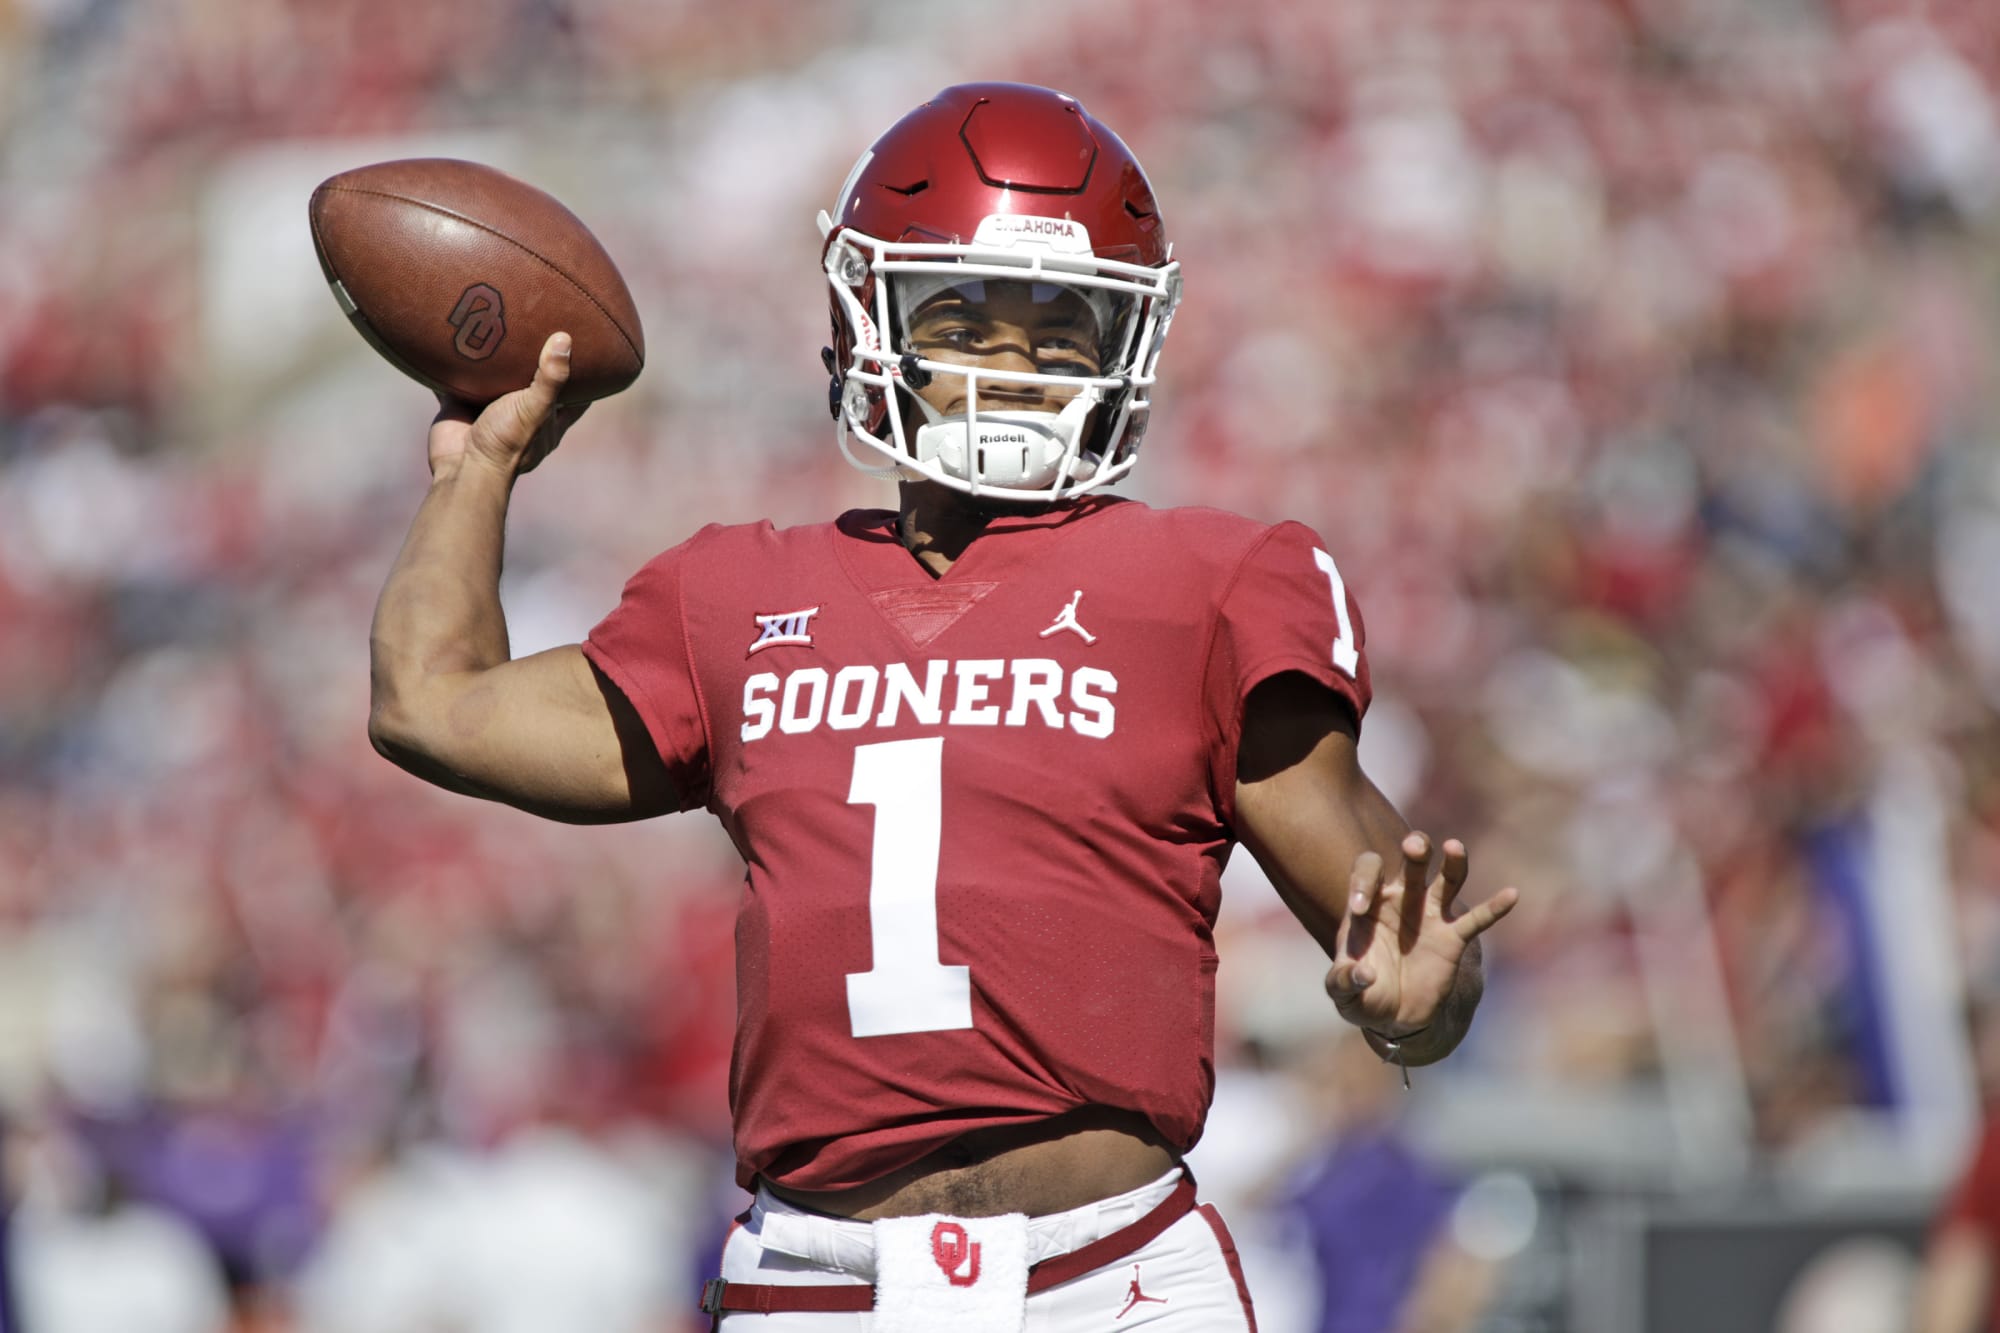 Road to the College Football Playoff: Oklahoma leans on Kyler Murray